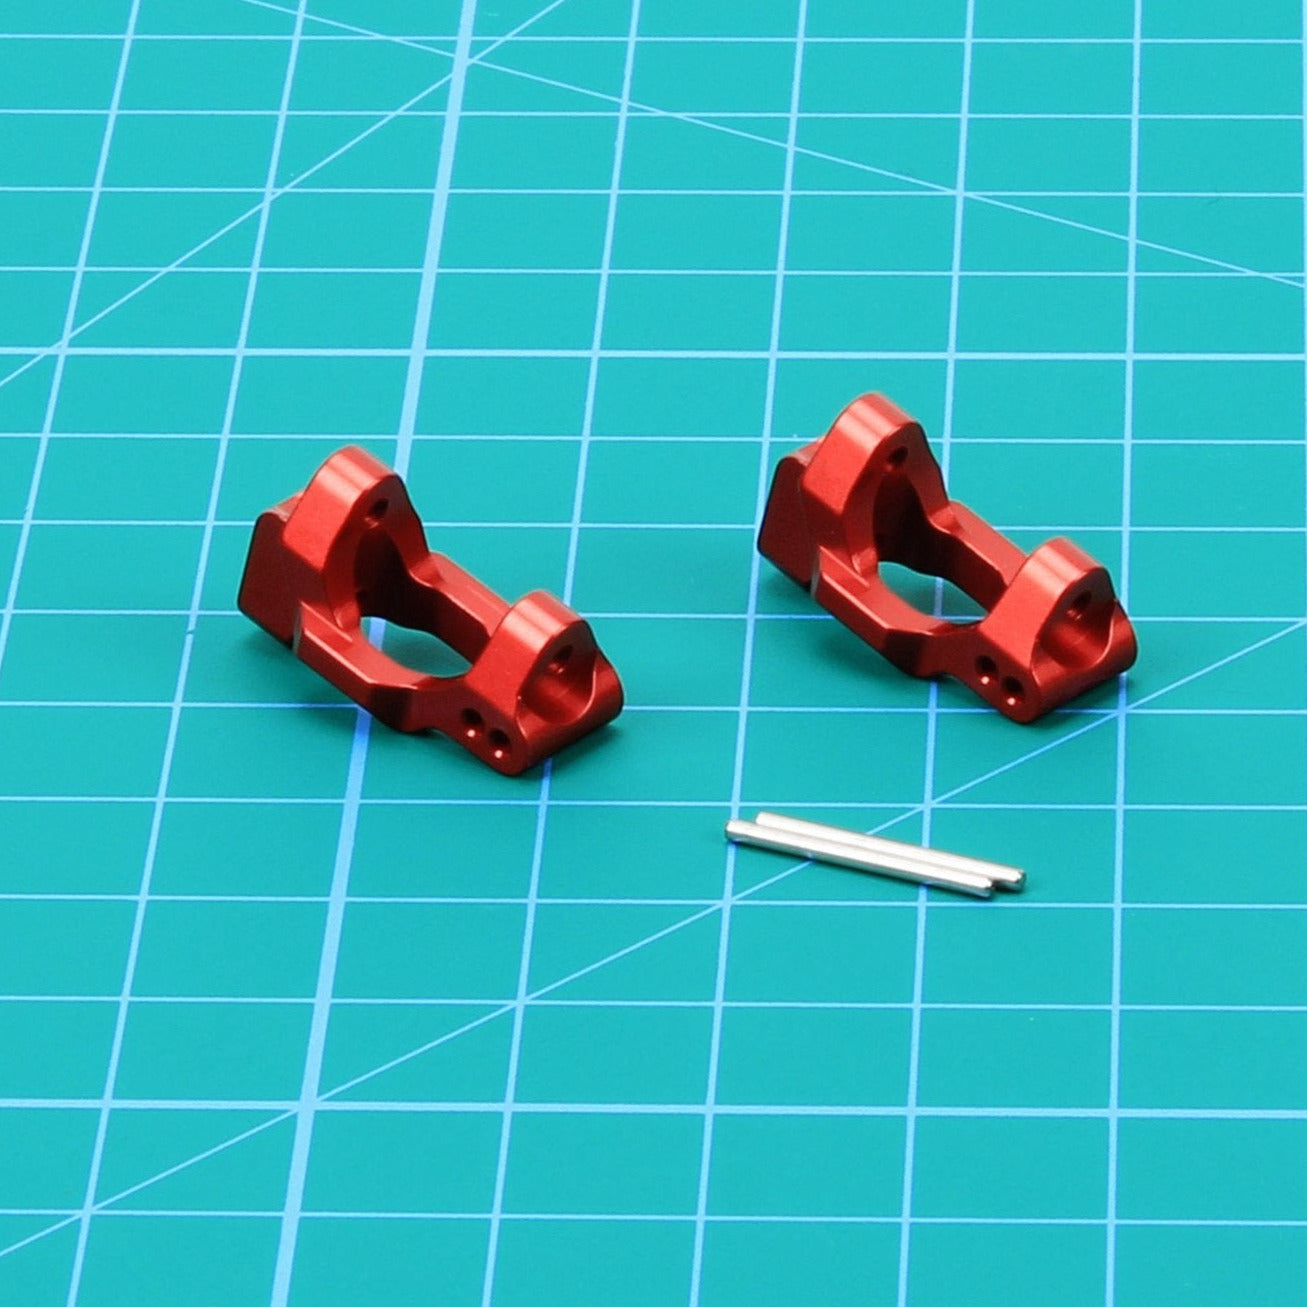 RCAWD TRAXXAS SLASH Red RCAWD RC Aluminum Caster blocks (c-hubs) 2pcs for 1/18 Traxxas Upgrade Parts